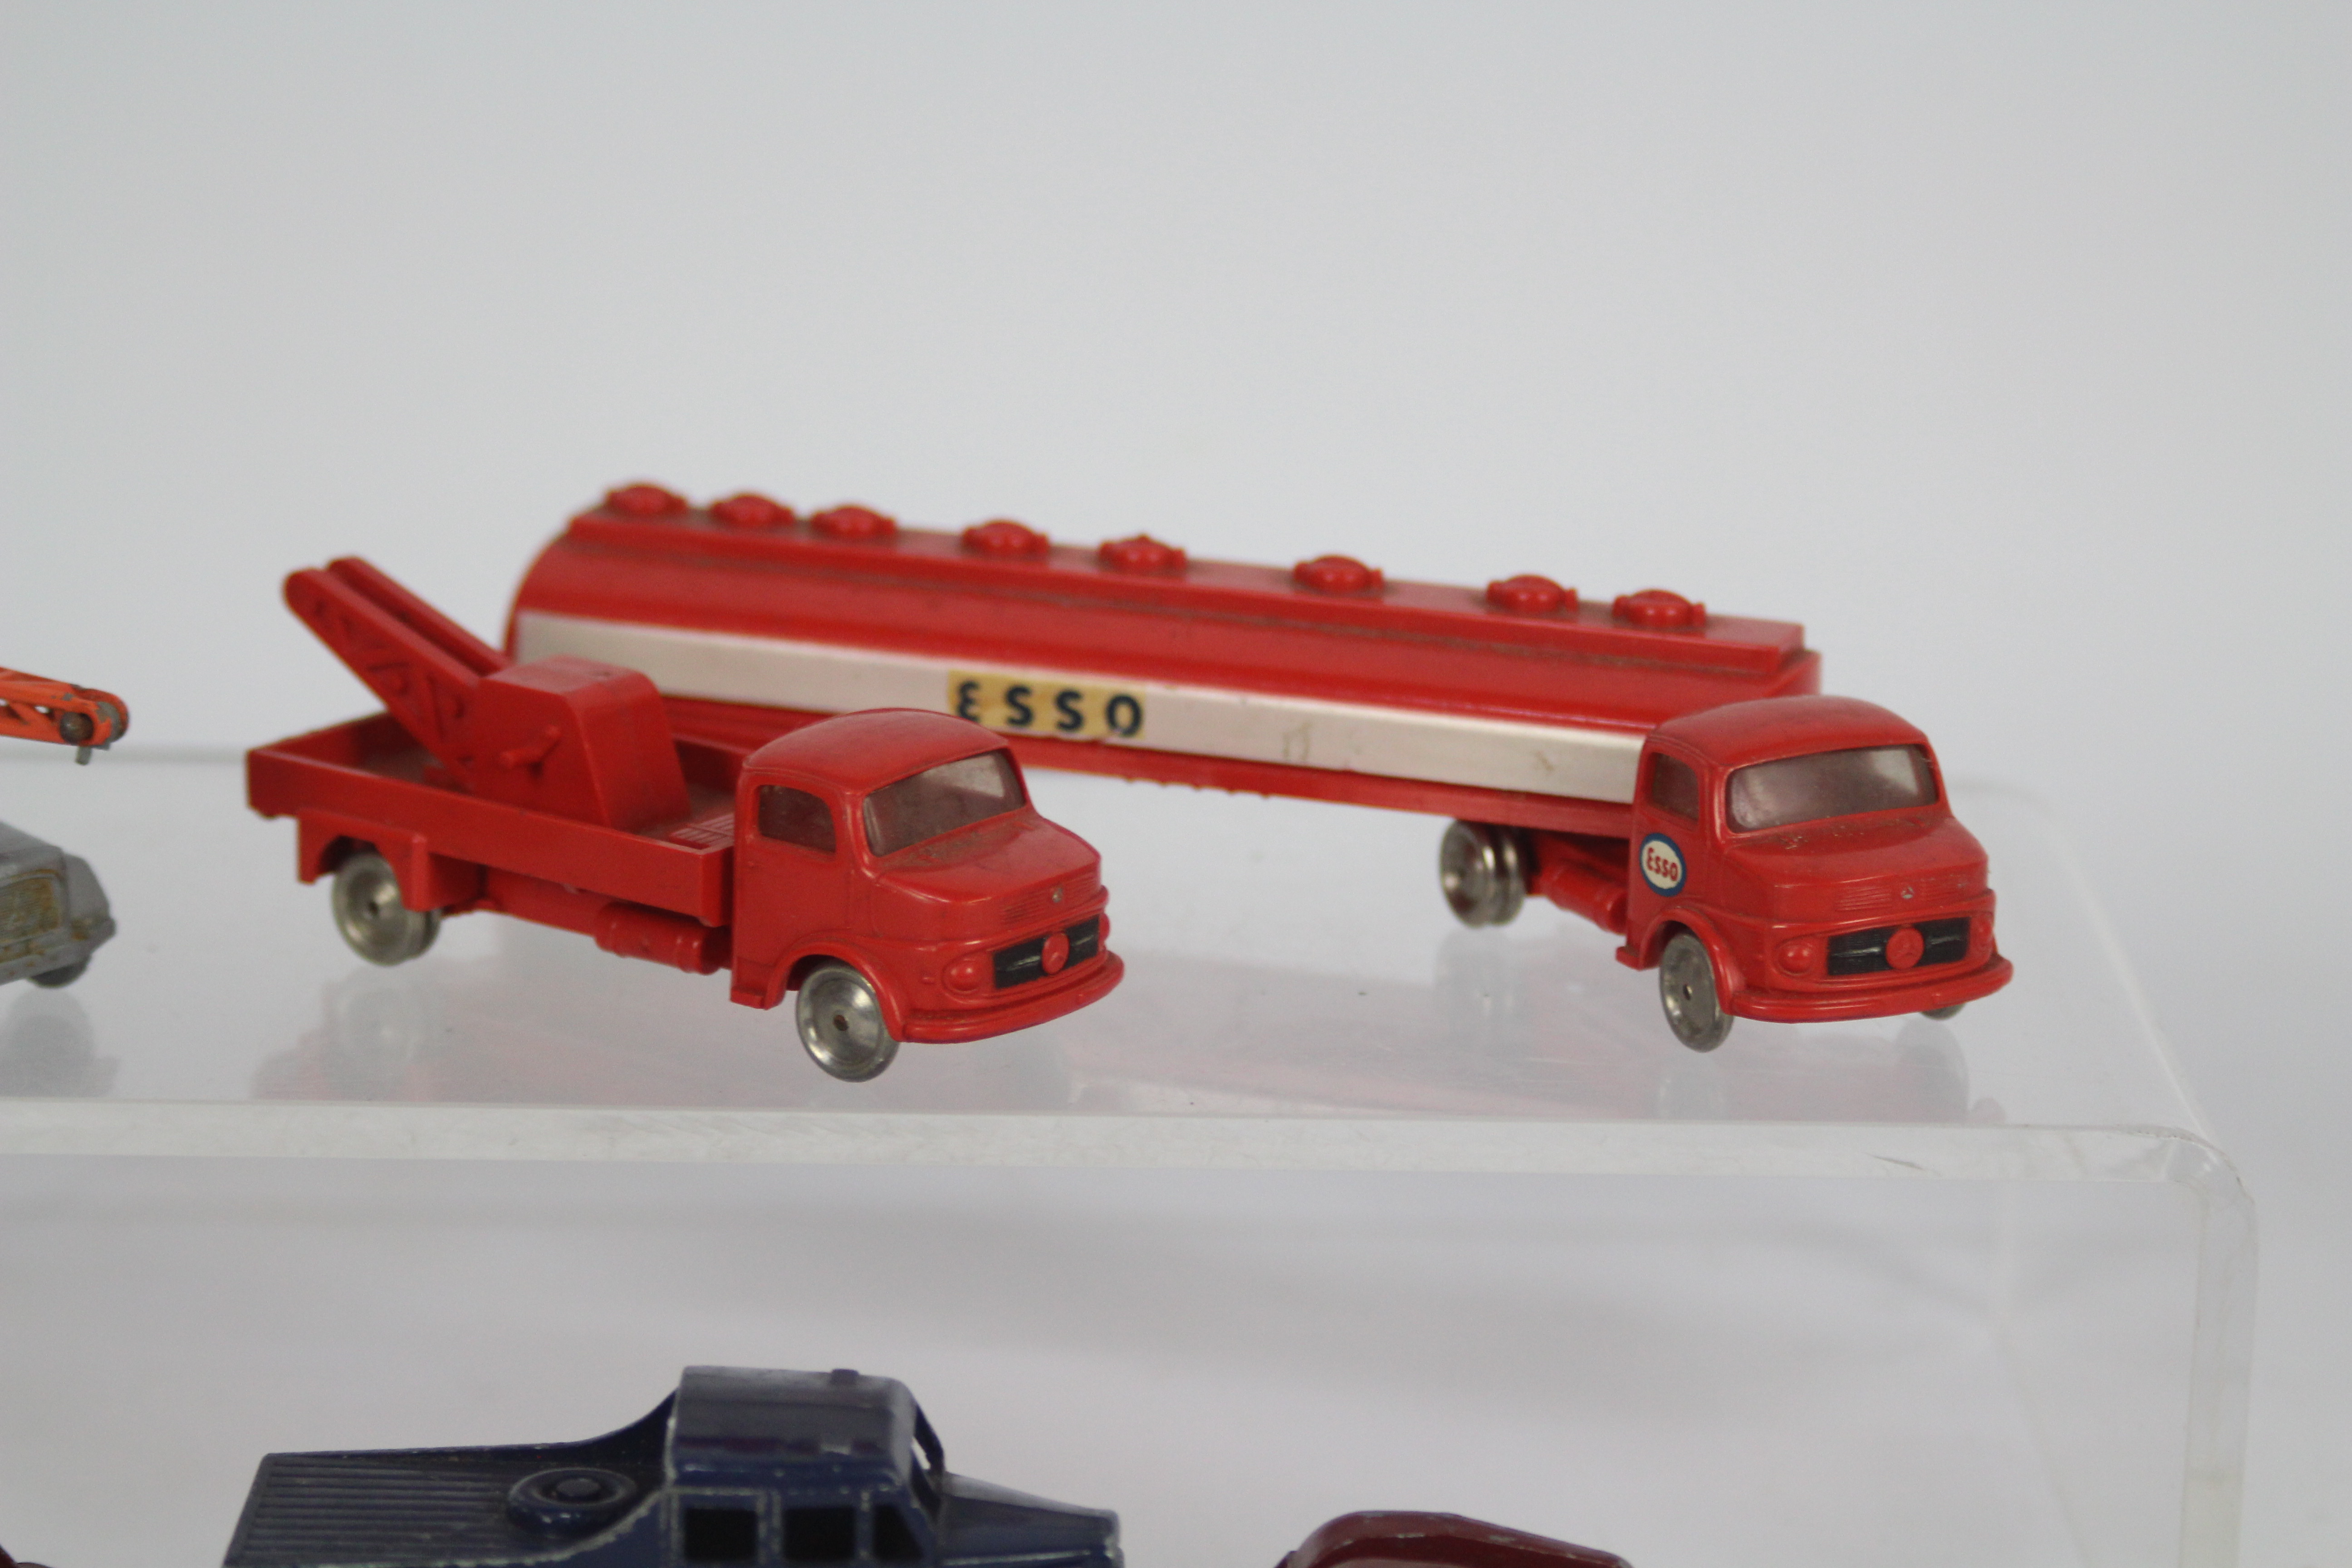 Lego - Matchbox - 4 x vehicles including two rare mid 1960s Lego Mercedes Benz trucks, - Image 2 of 3